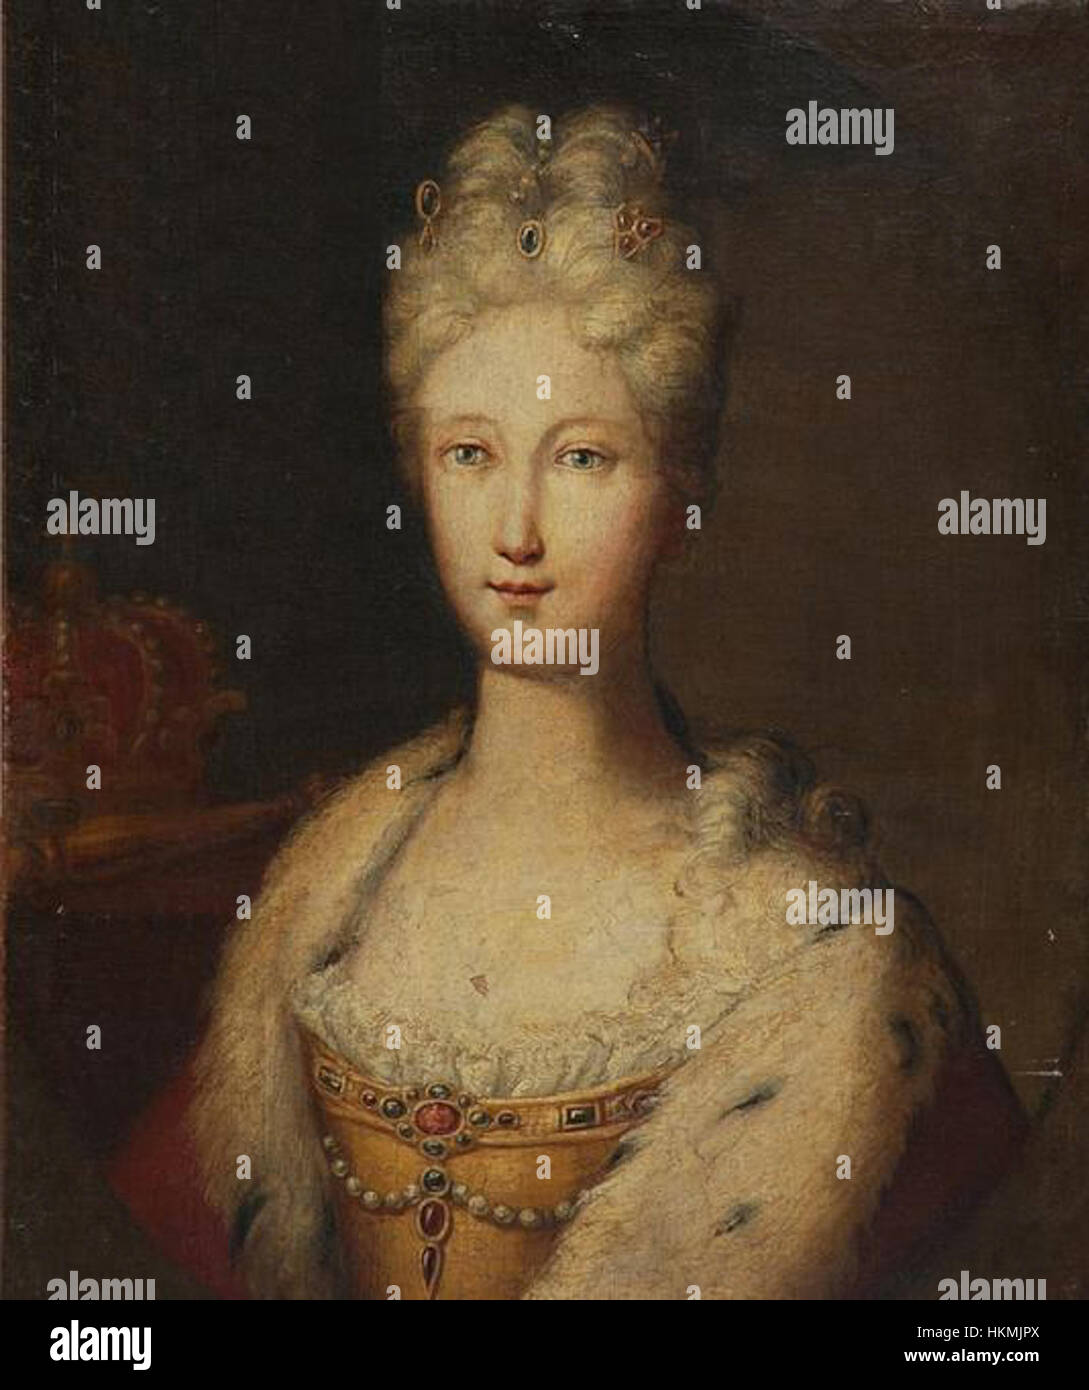 Queen Elisabeth Farnese of Spain with the Spanish royal crown in the background by an unknown artist Stock Photo